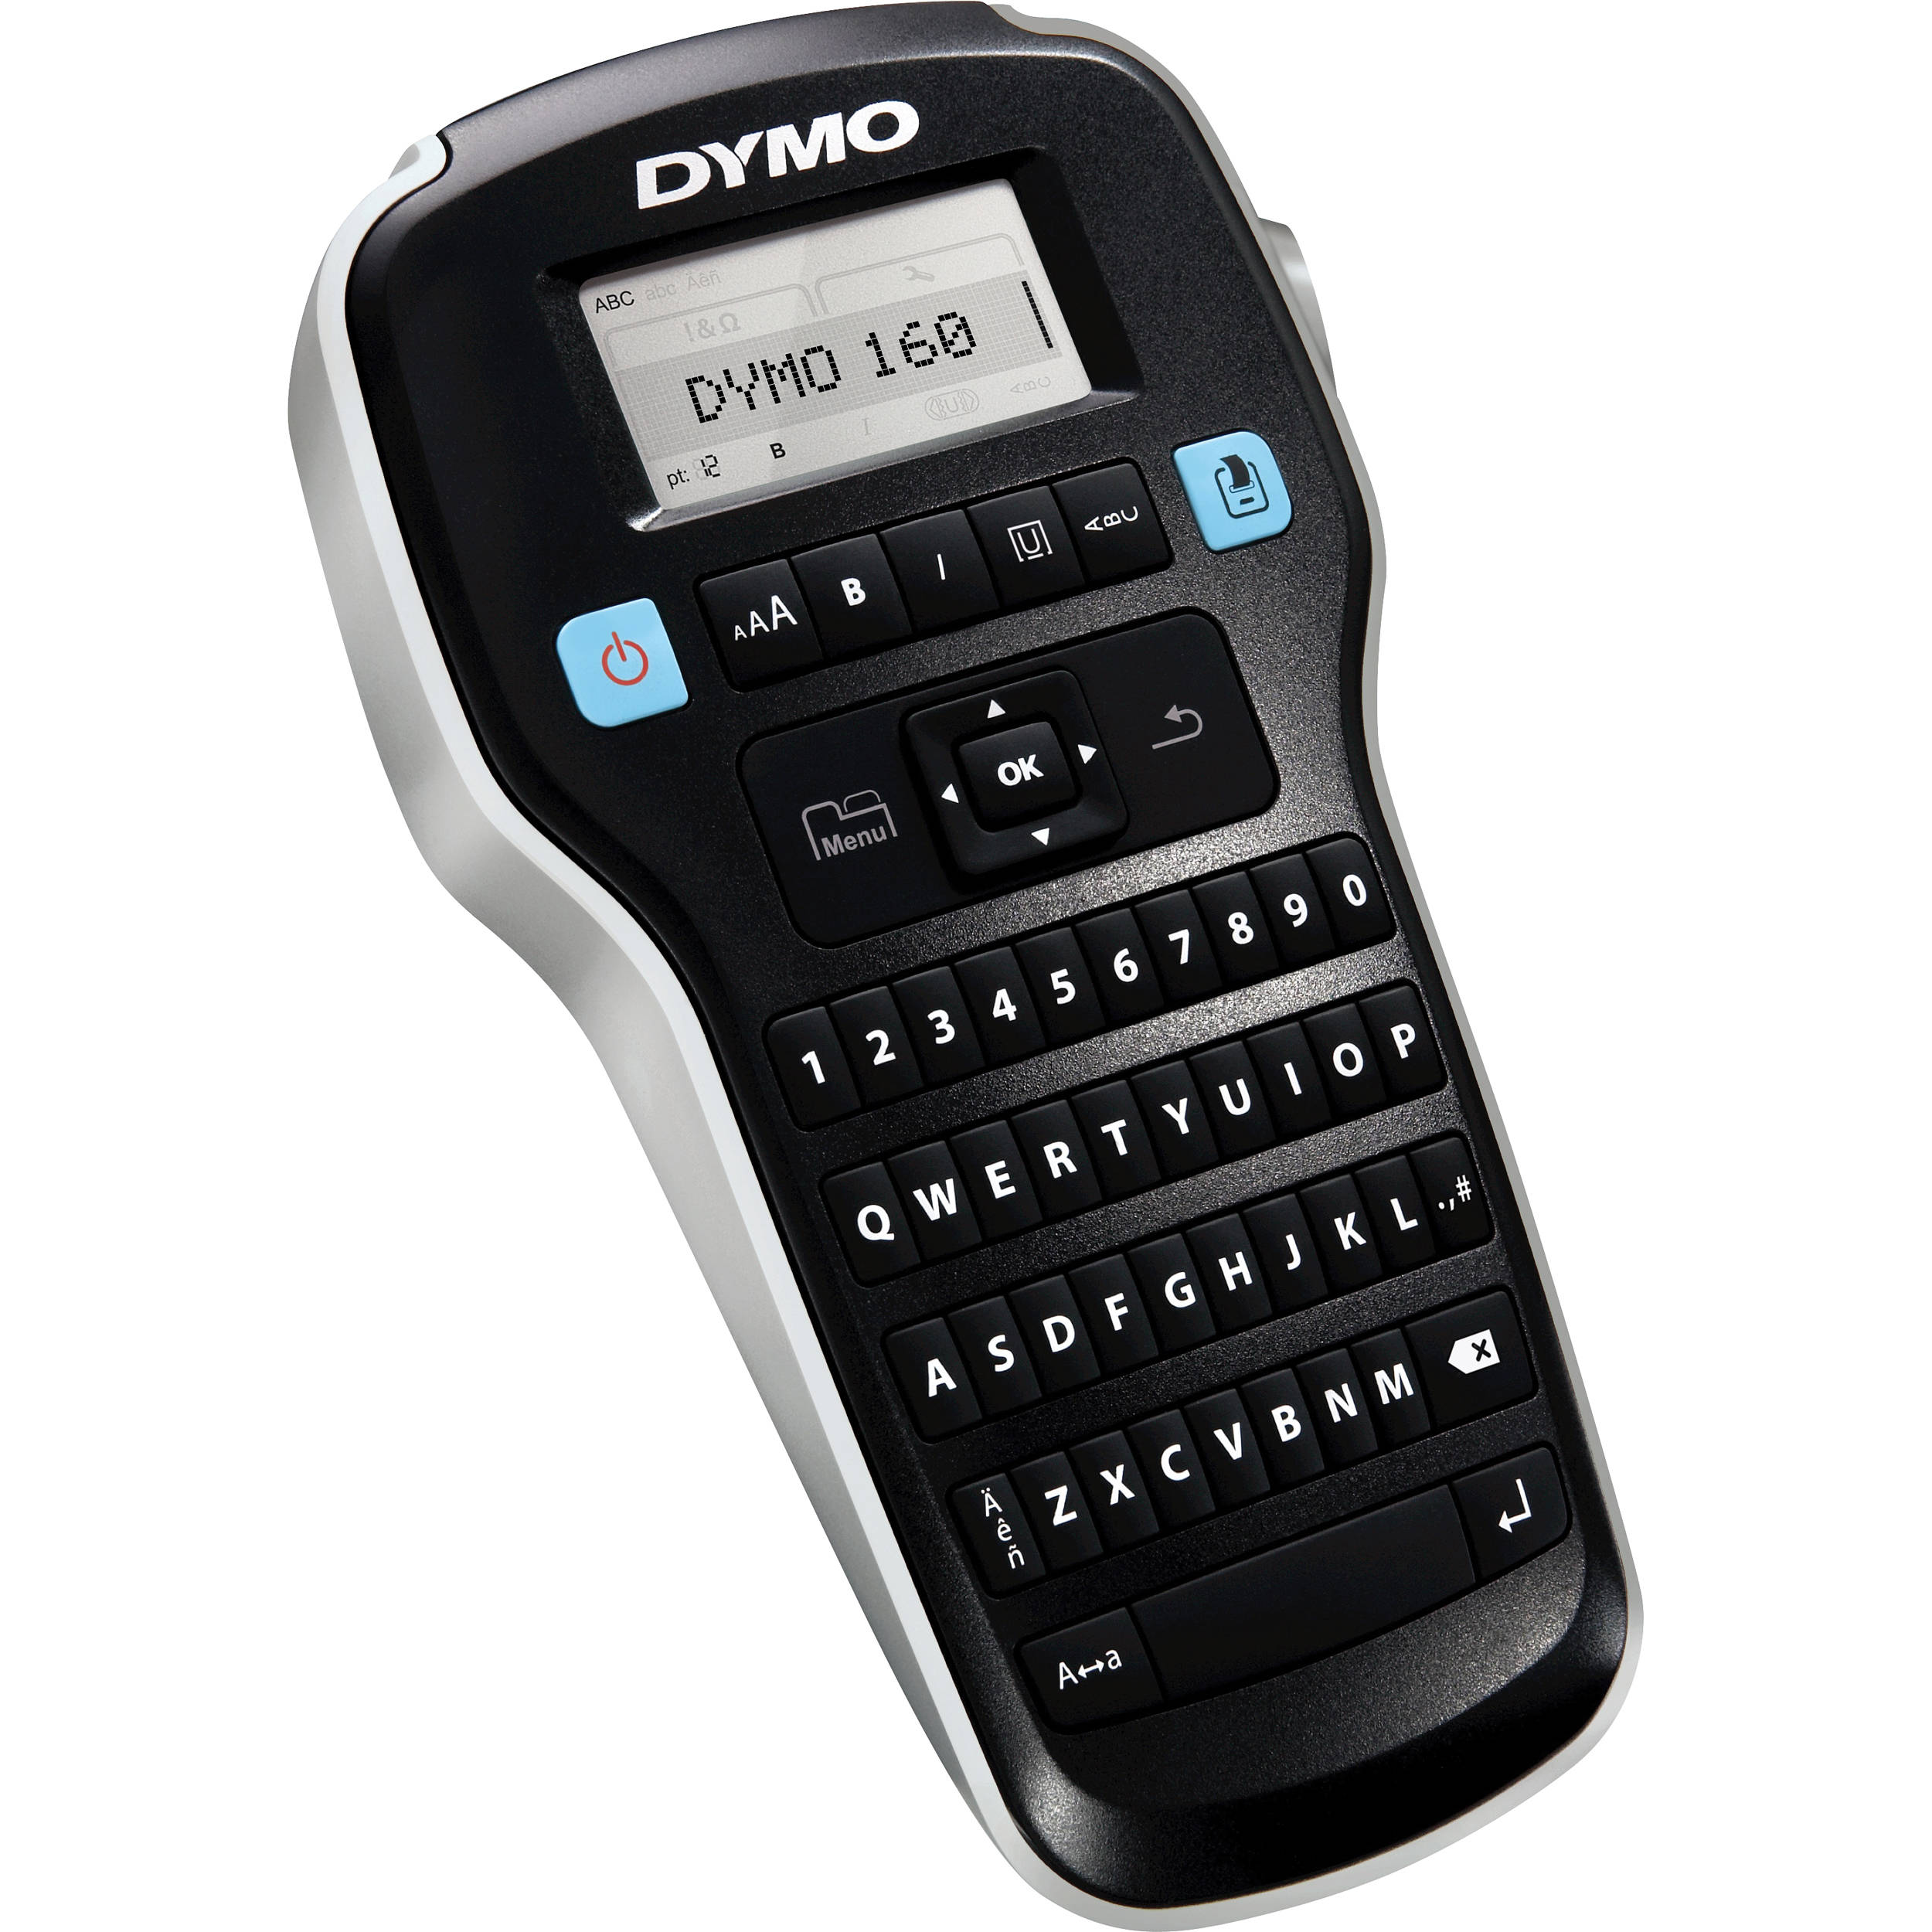 labelmanager 160 dymo